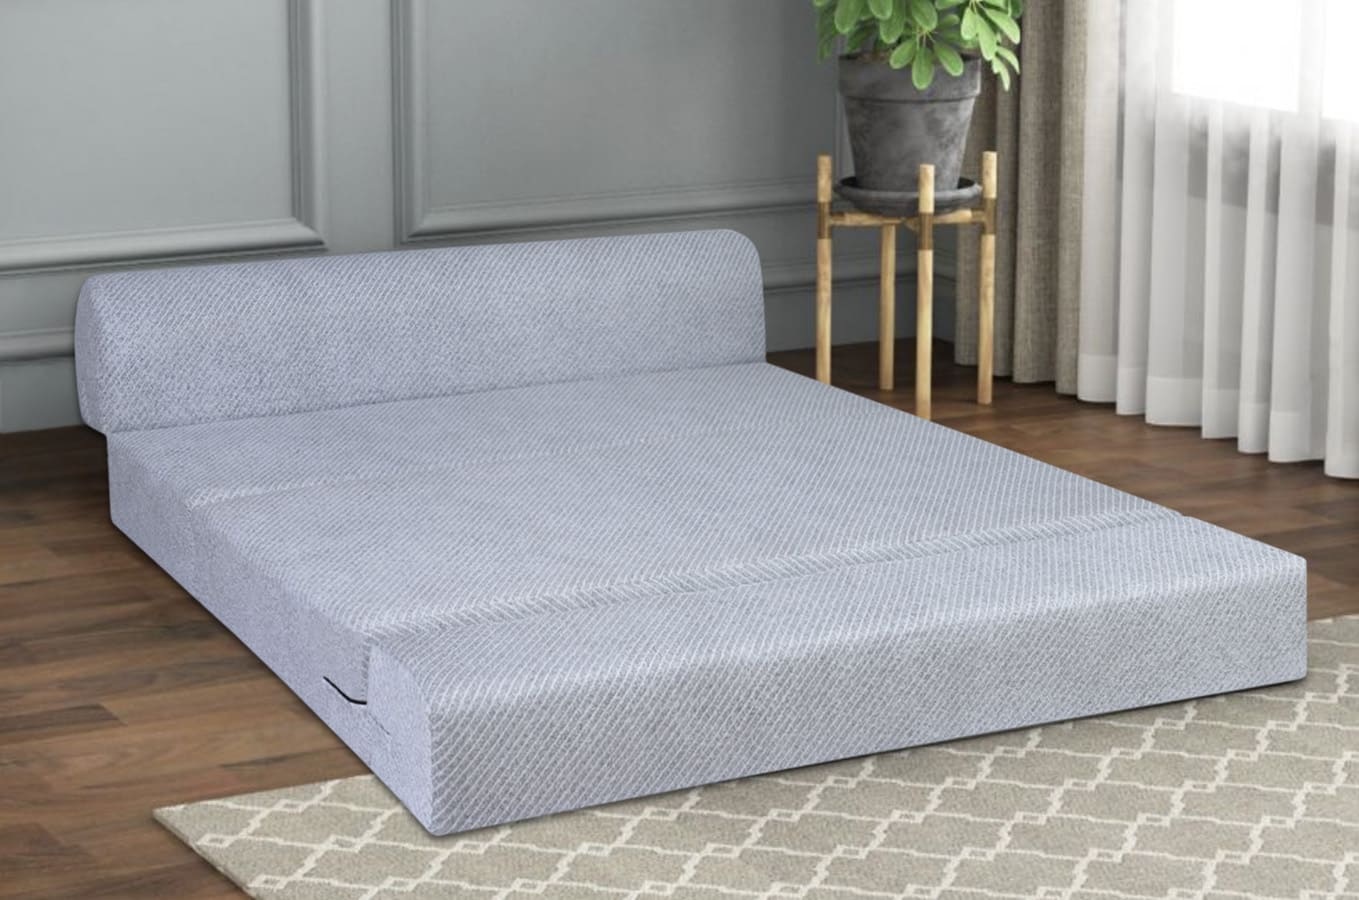 Bindal Sofa Cum Bed Double Size 4X6.5 Feet 48X78 Thickness 8 Inch